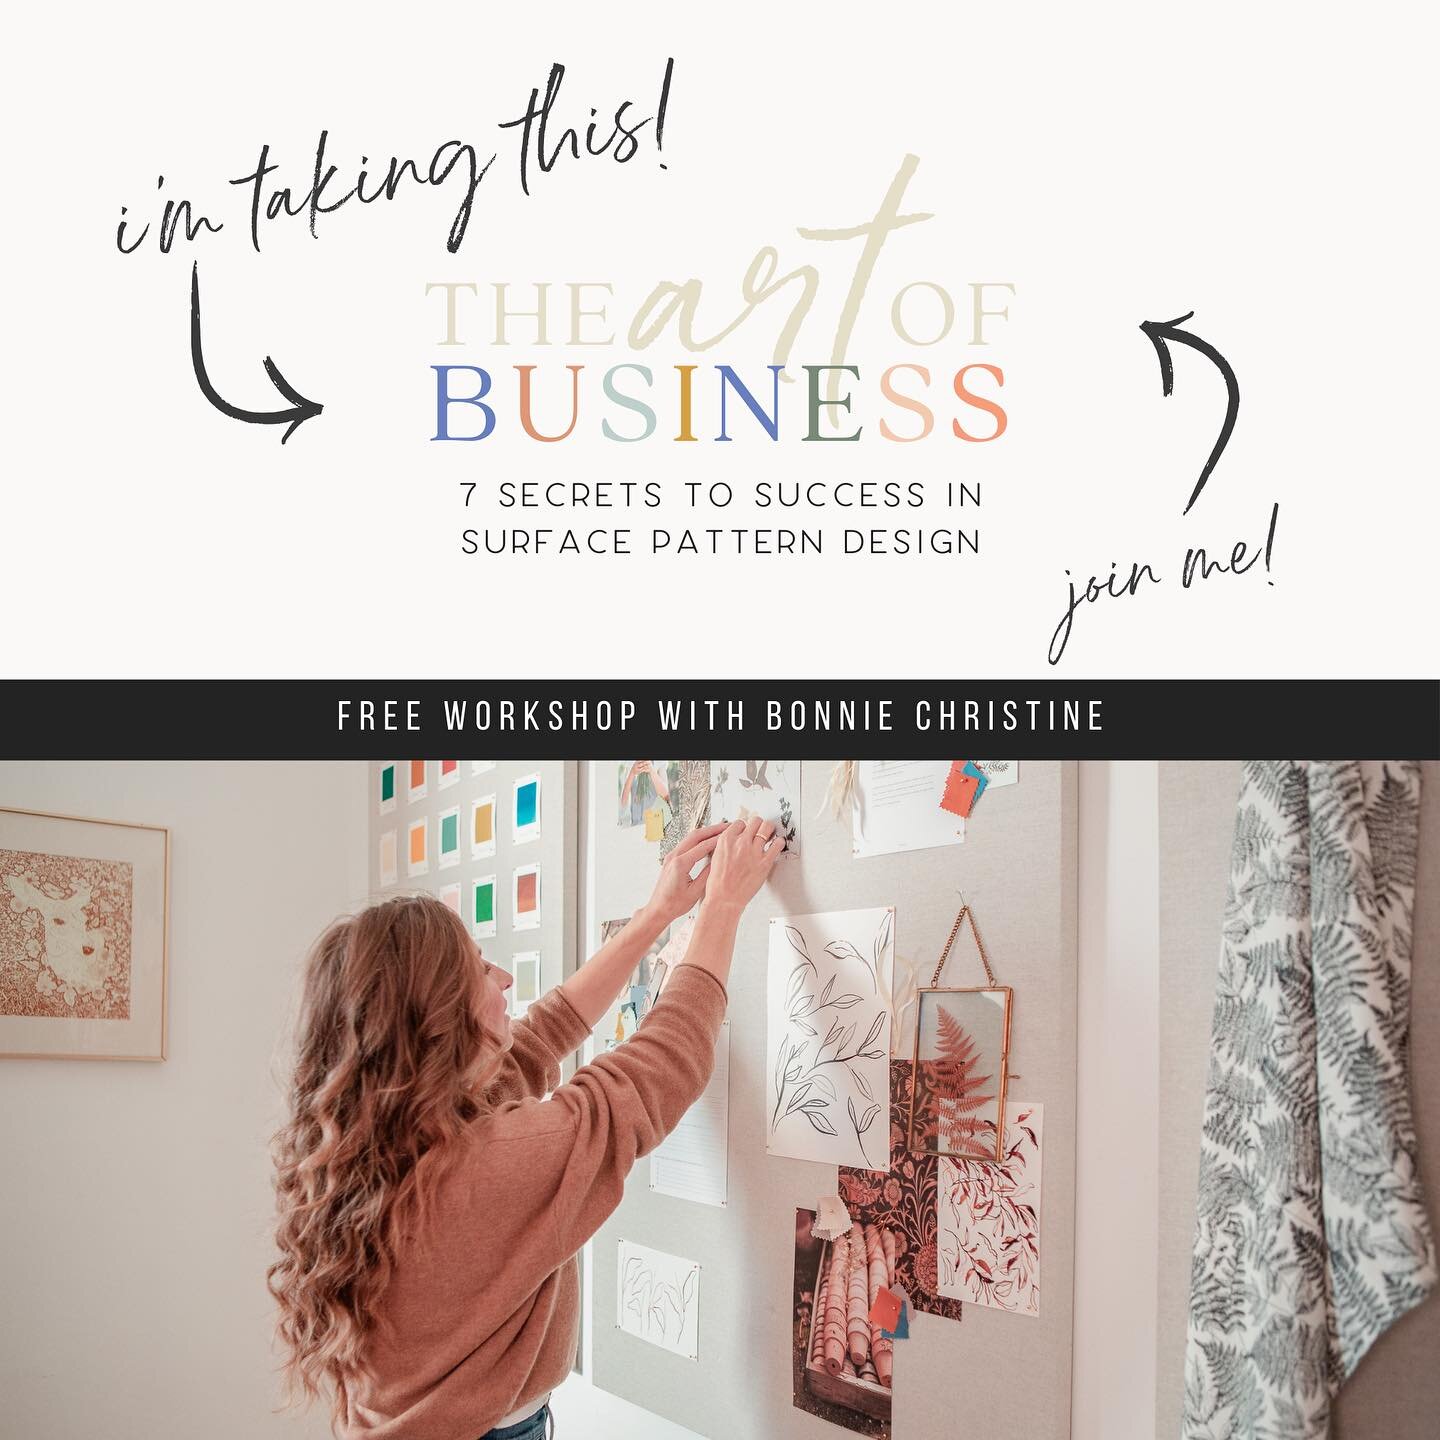 I know, I know, ANOTHER post about this workshop?! I get it. Truly, I do. But here&rsquo;s the thing...it&rsquo;s free. 100% free. In lesson one, Bonnie is transparent about the fact that she&rsquo;s going to introduce you to her paid course, Immersi